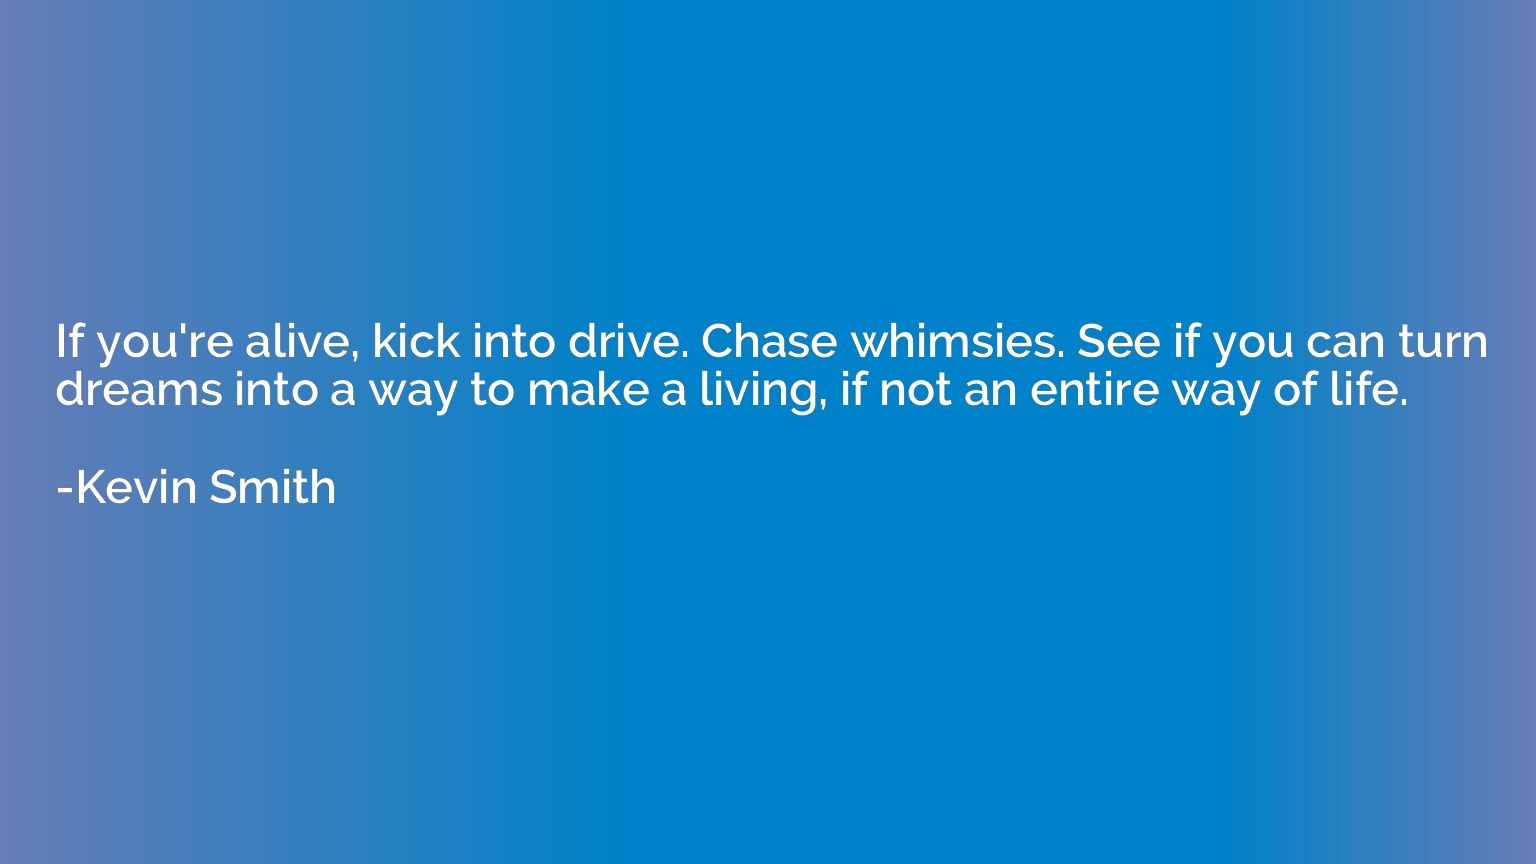 If you're alive, kick into drive. Chase whimsies. See if you